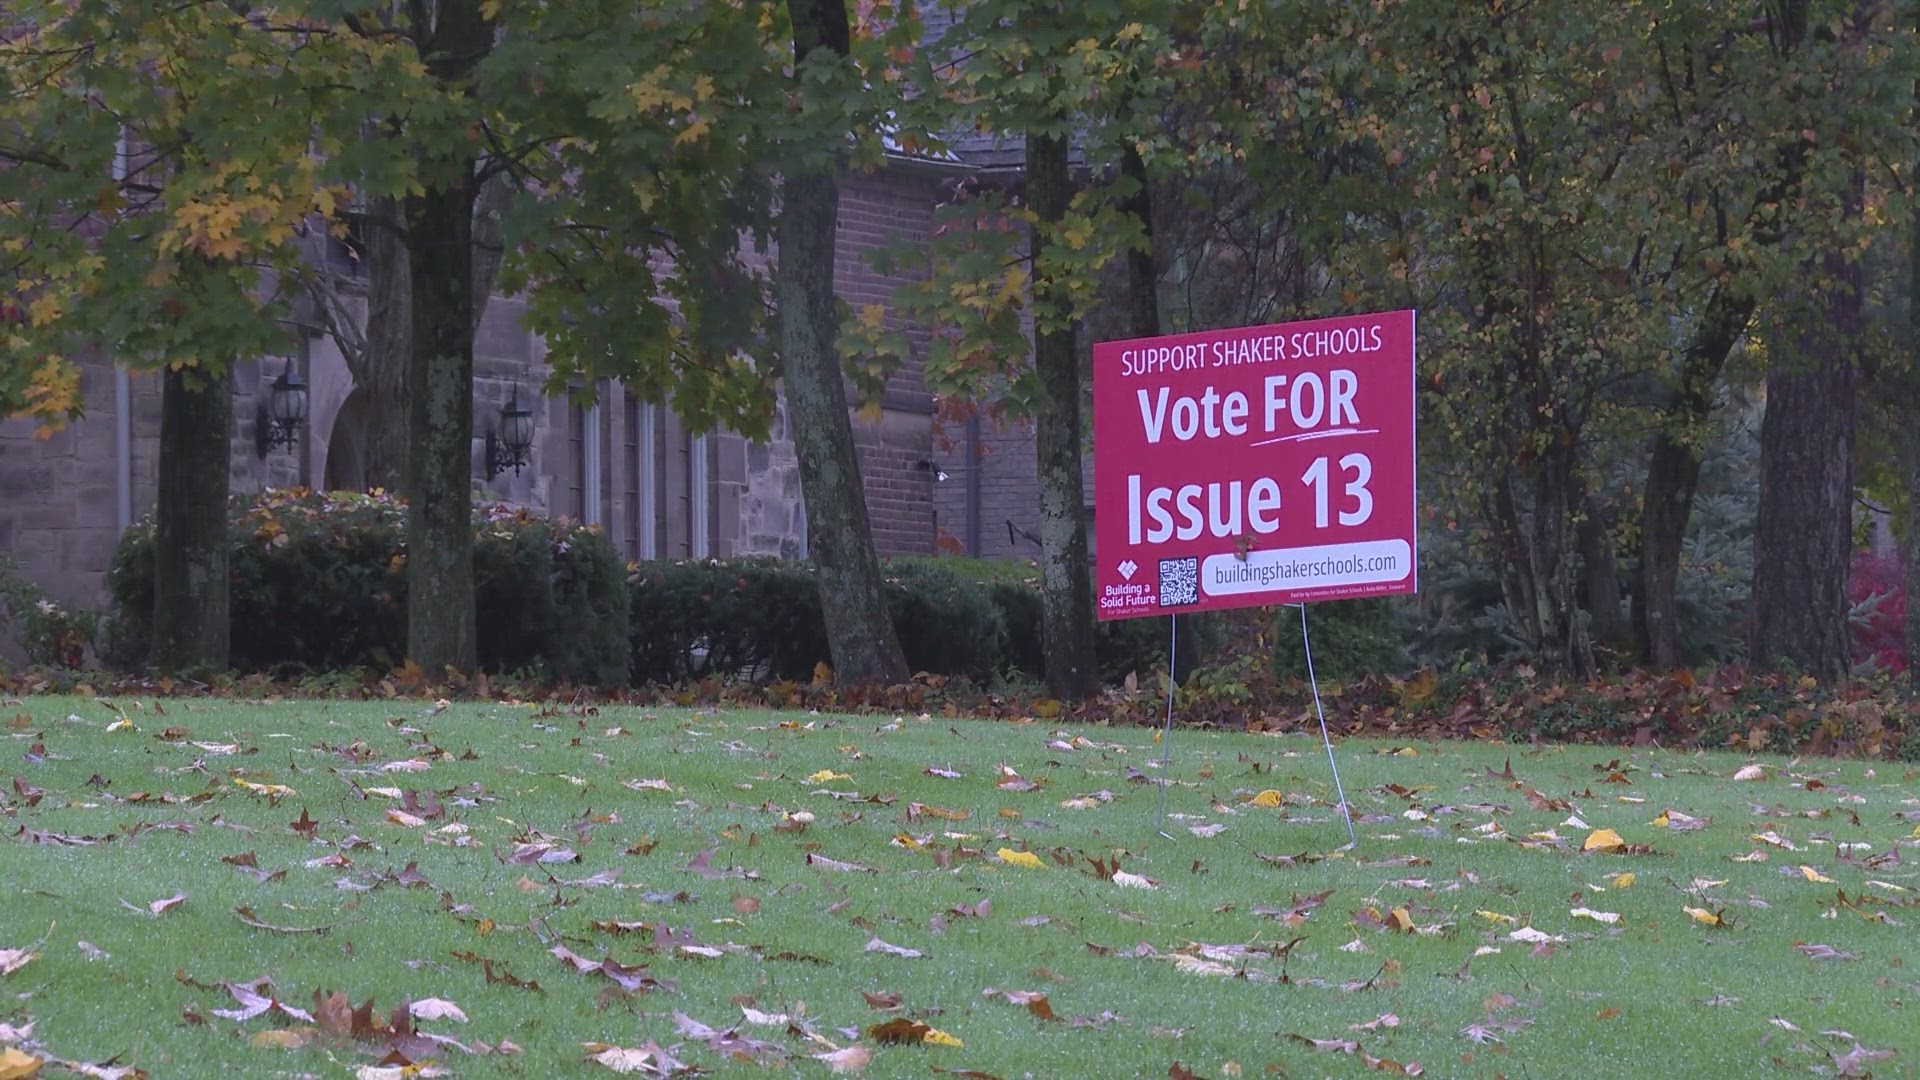 Issue 13 would support the renovation of many Shaker Heights schools, but some residents are worried about the costs that would fall onto taxpayers.